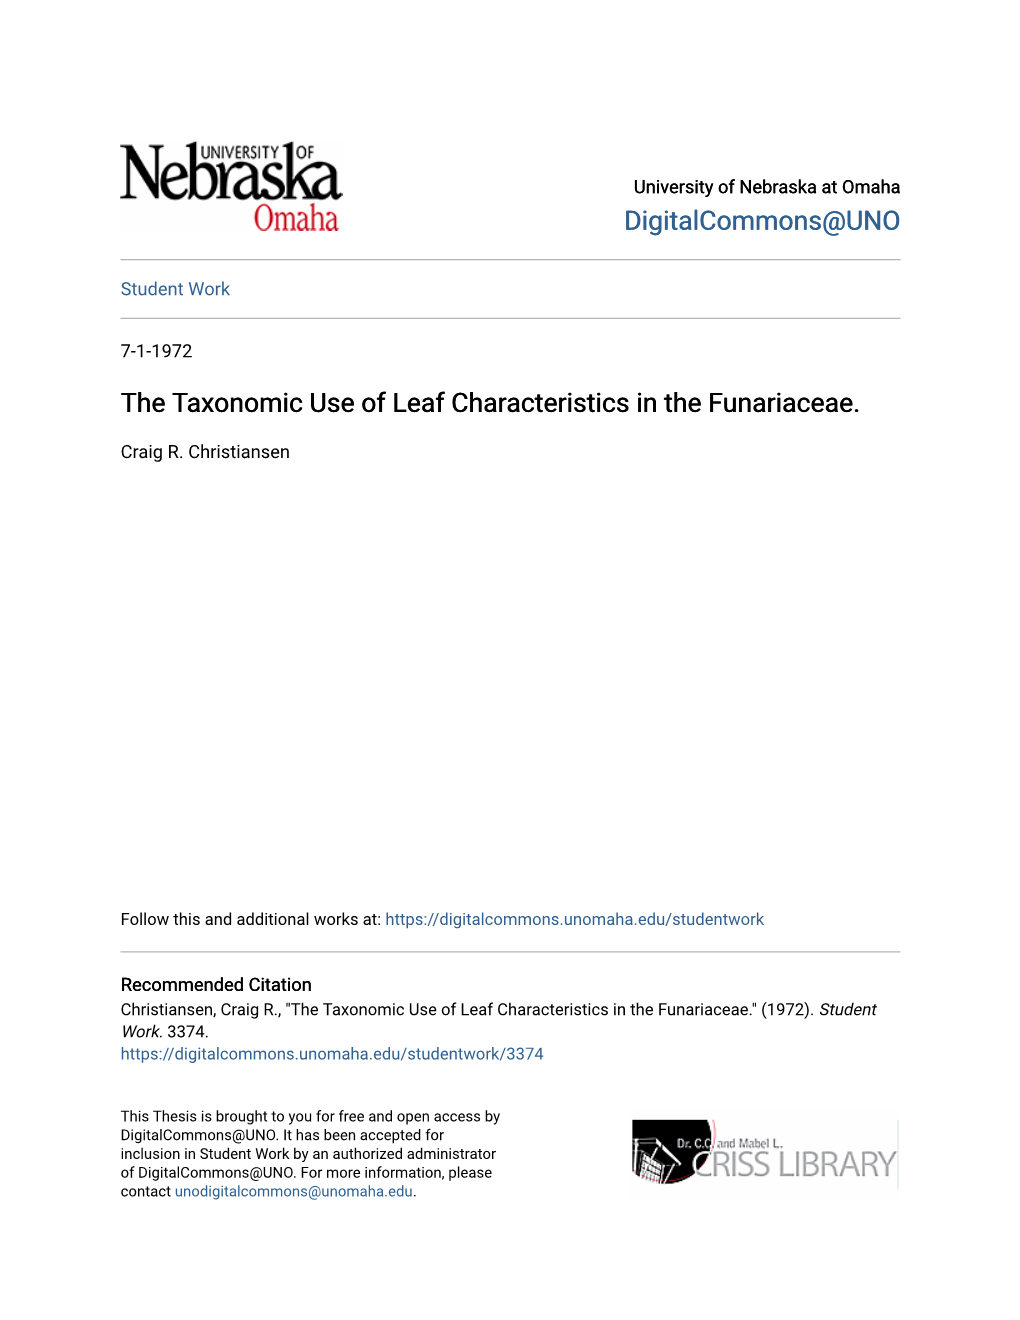 The Taxonomic Use of Leaf Characteristics in the Funariaceae